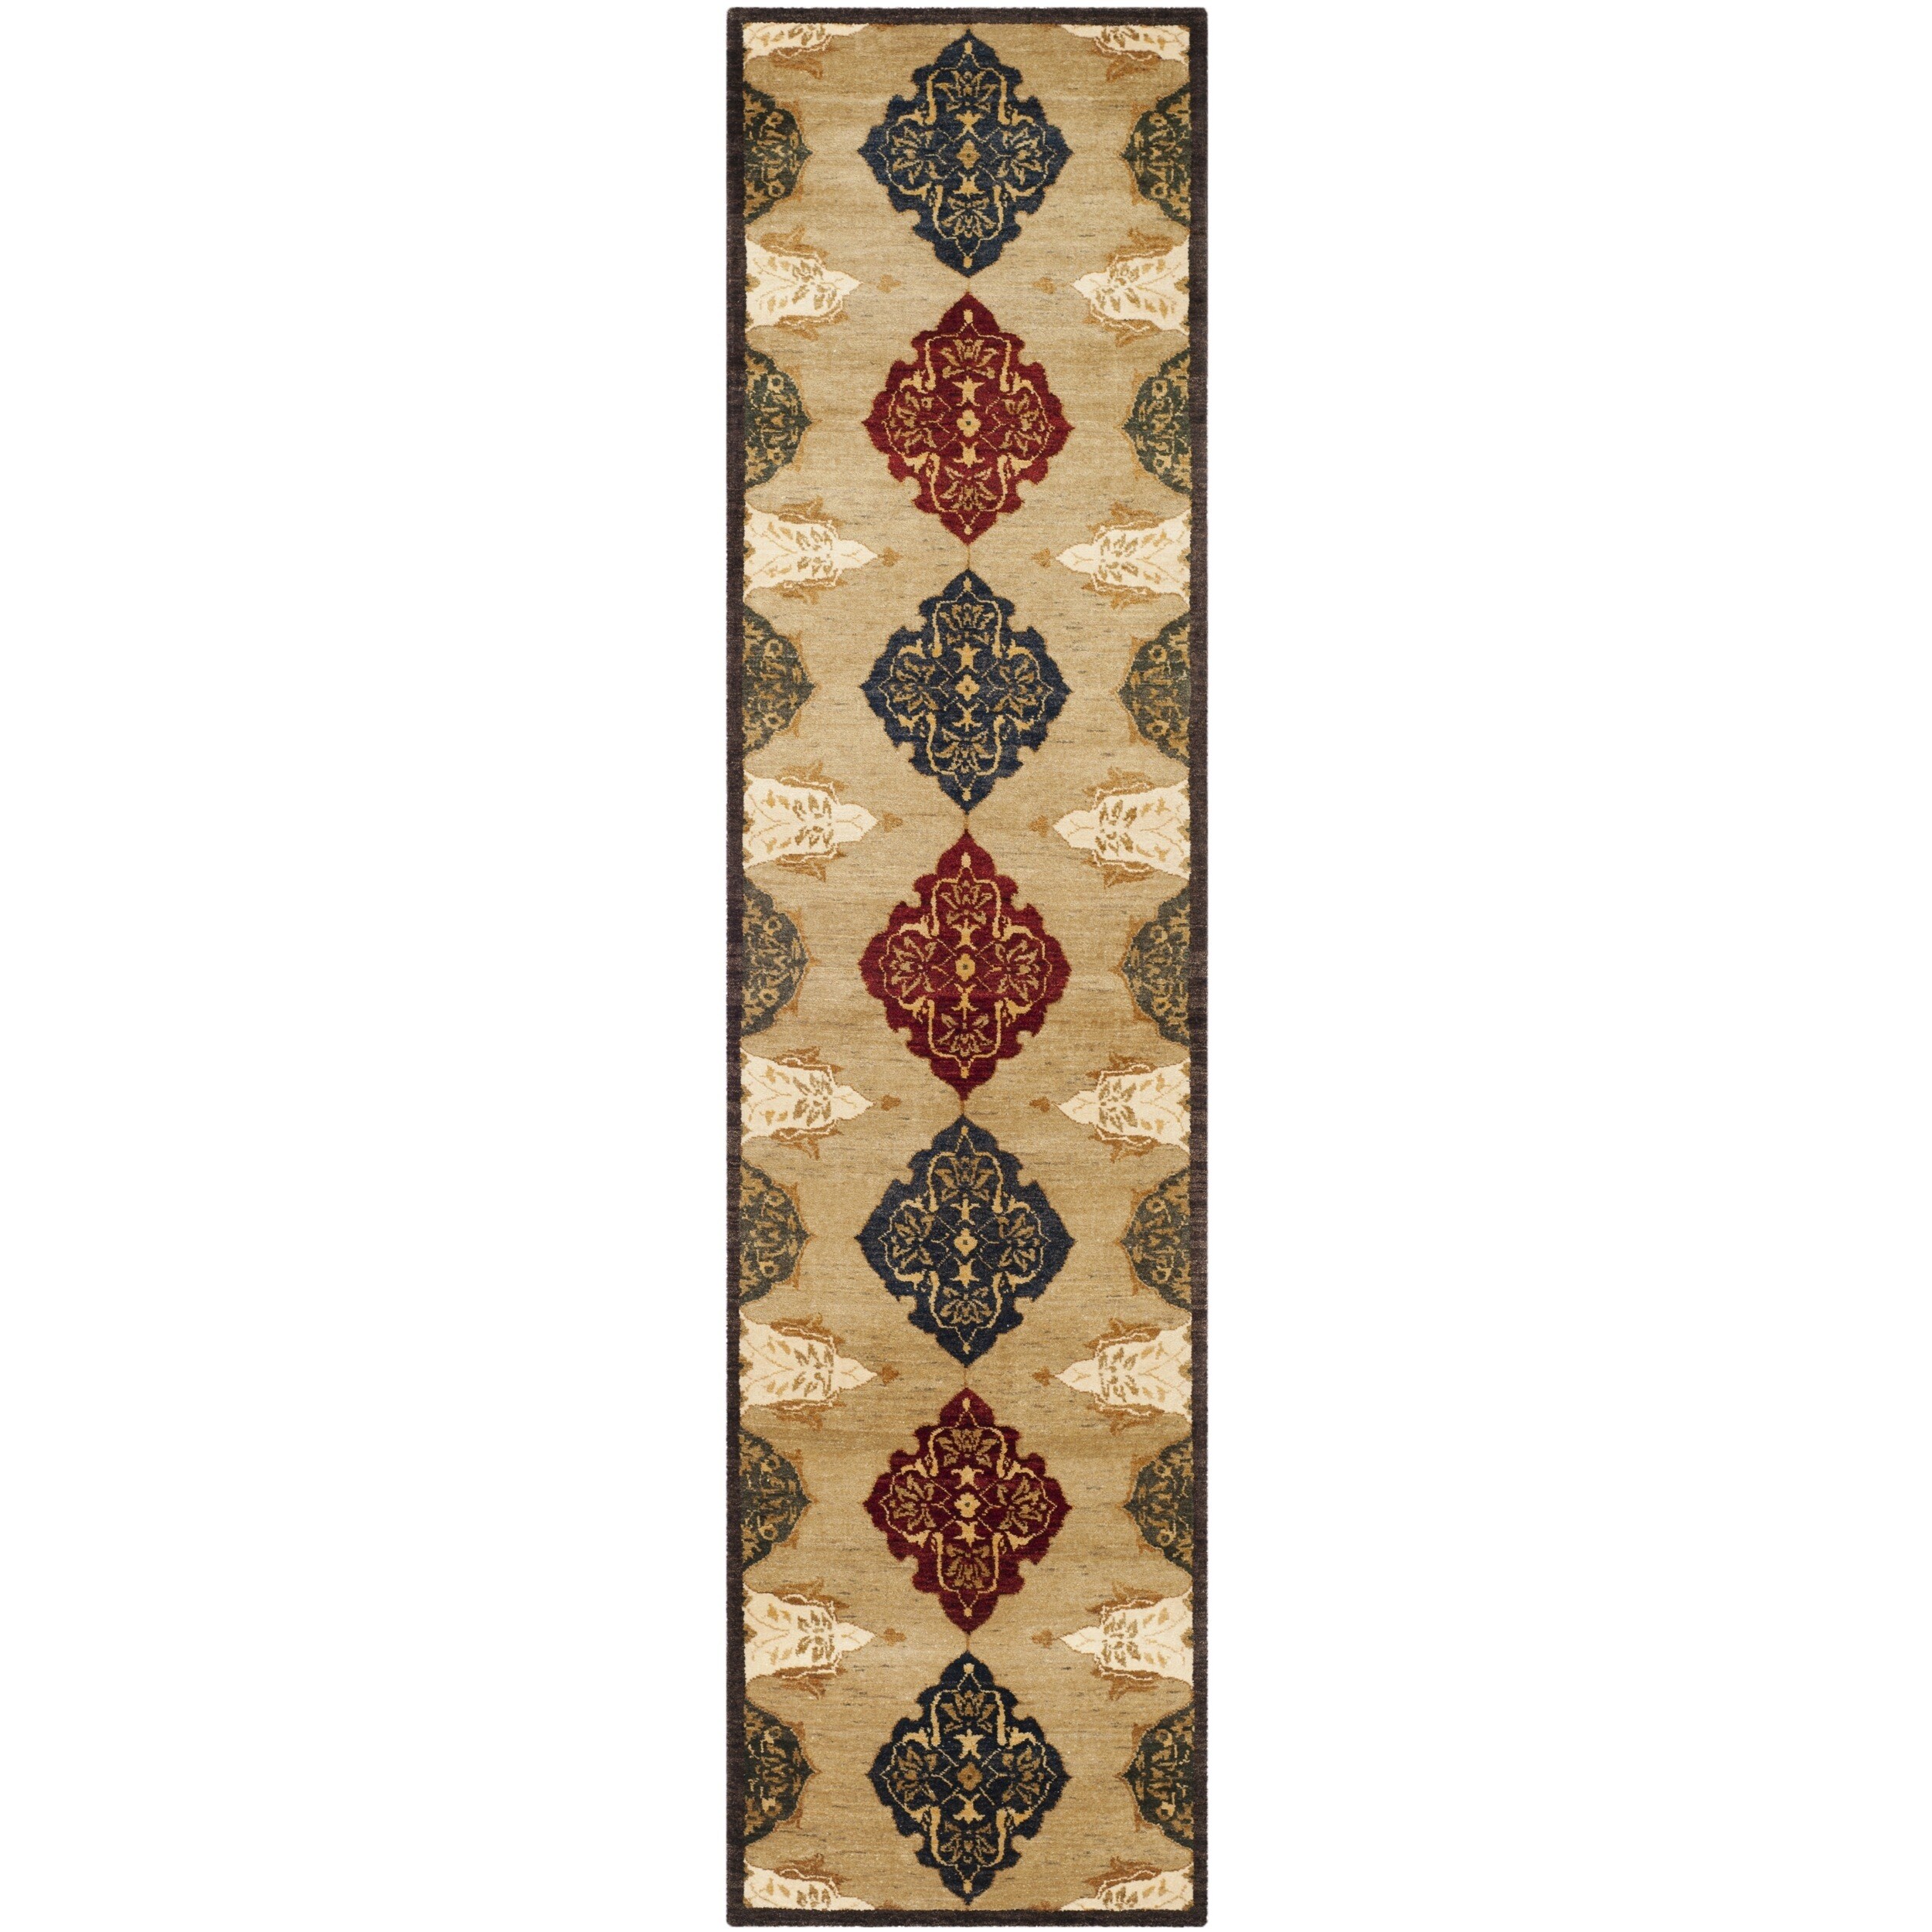 Safavieh Hand knotted Tibetan Multicolored Geometric patterned Wool Rug (26 X 10)